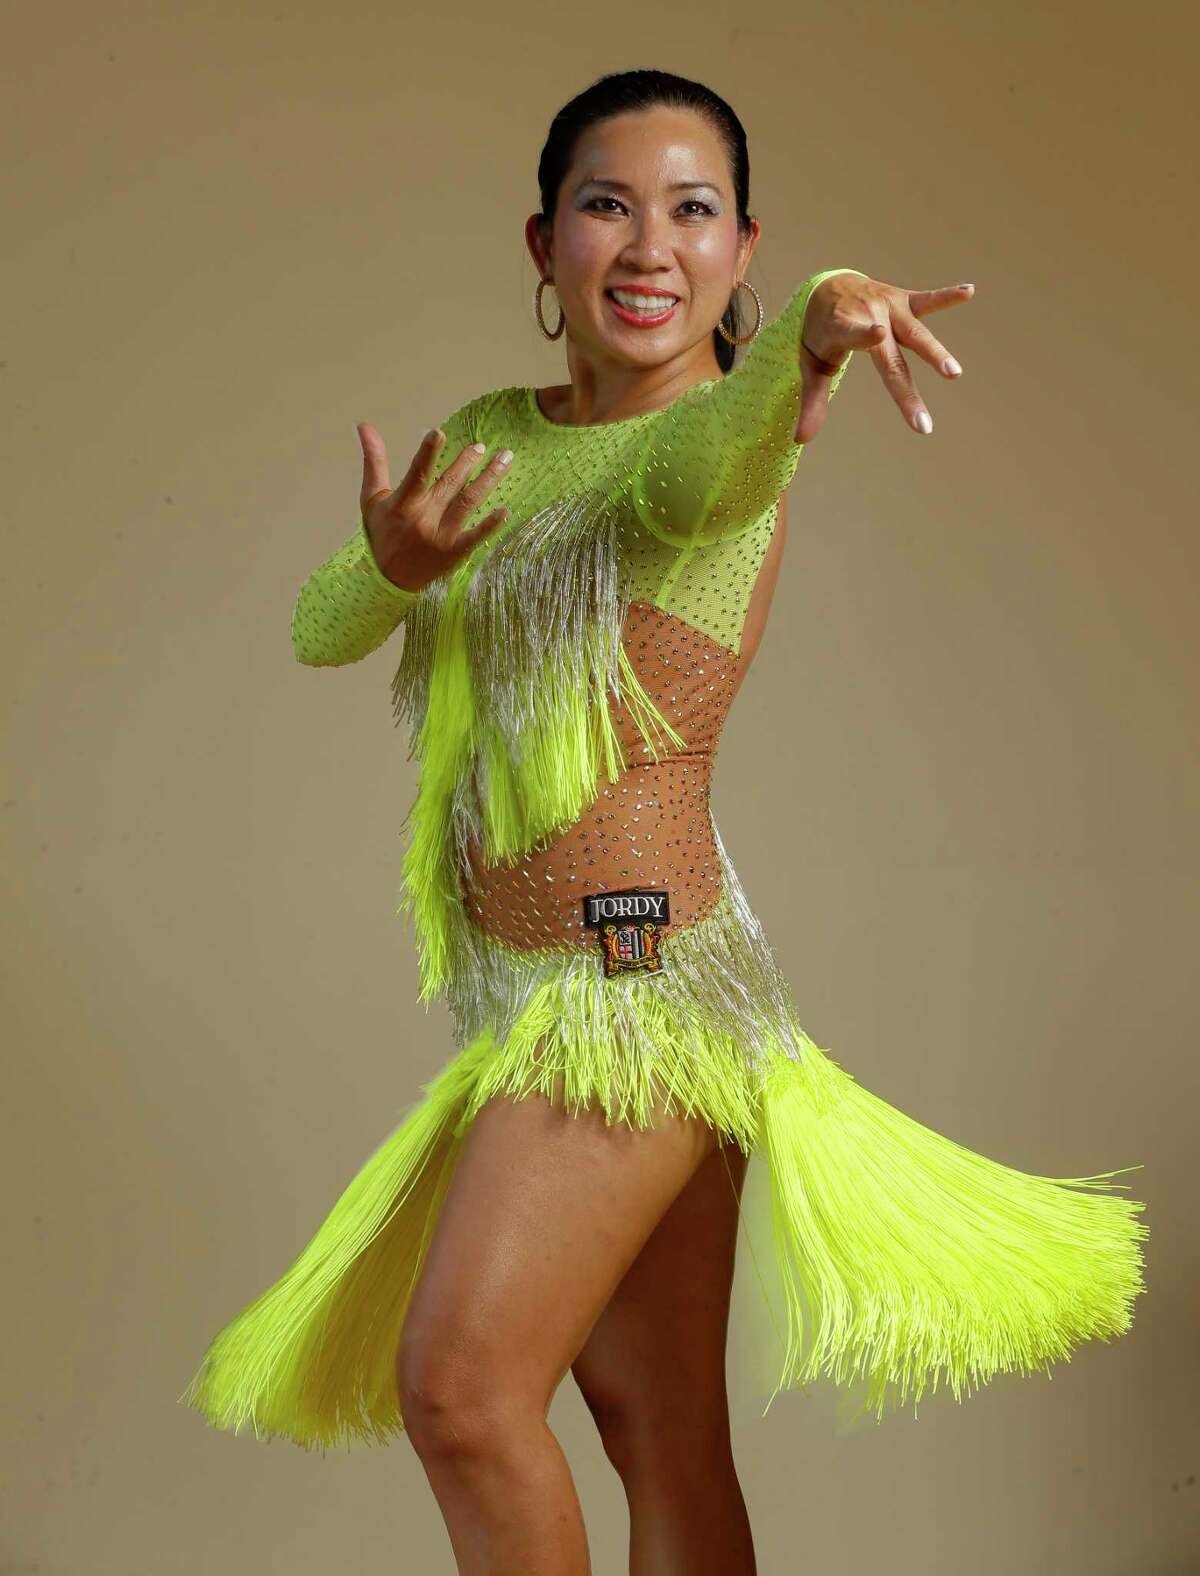 Dr. Tina T. Bui, a pediatric dentist, started off taking dance lessons with her husband.